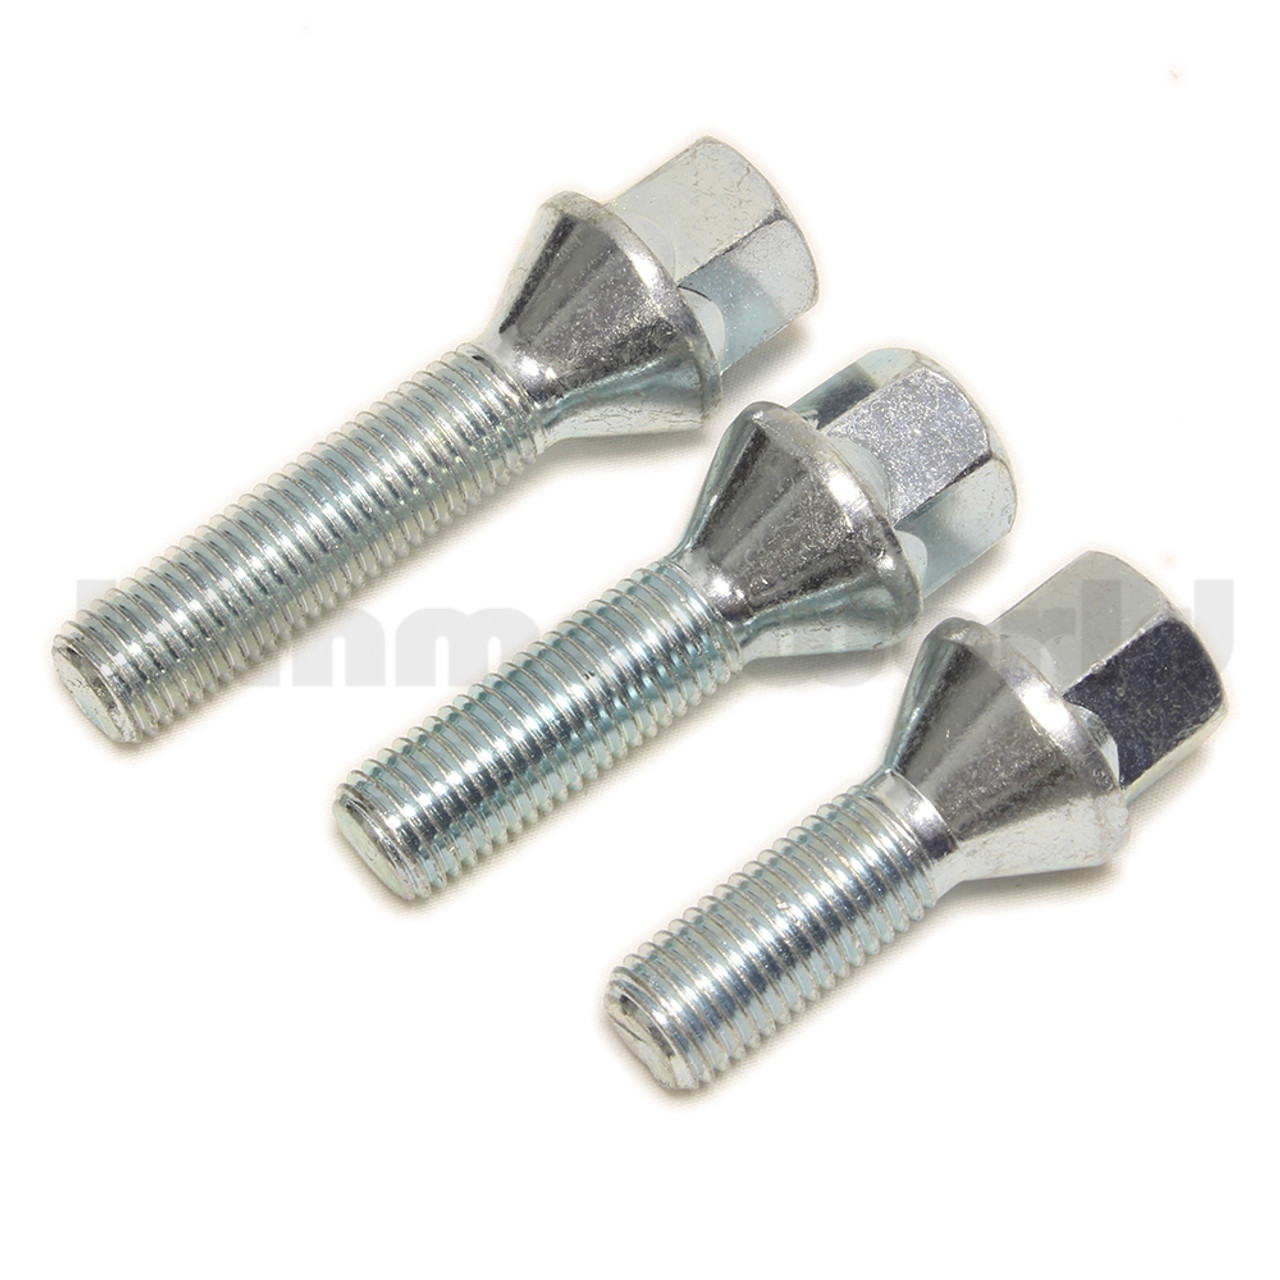 M12x1.5 Extended Length Wheel Bolts for Wheel Spacers  - Silver - 47mm